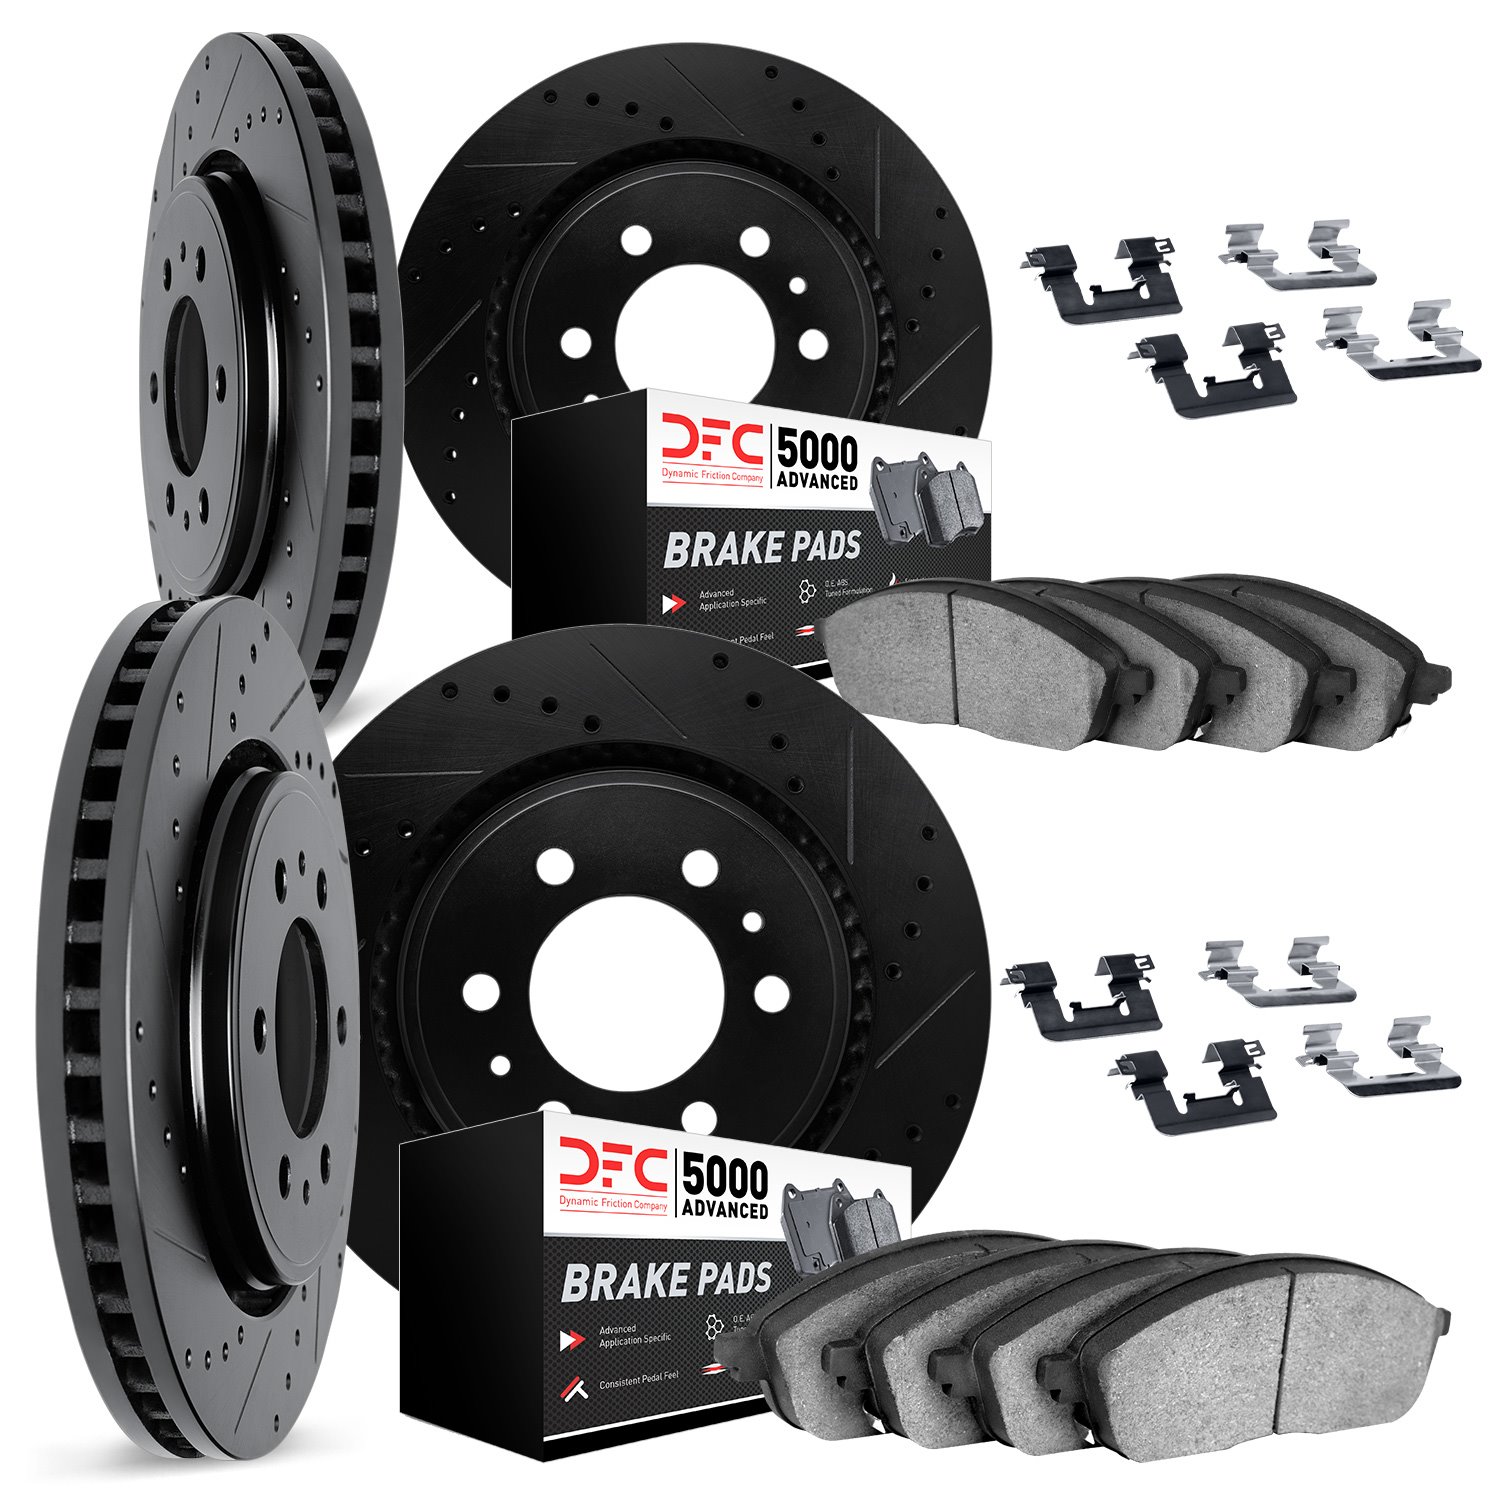 8514-47294 Drilled/Slotted Brake Rotors w/5000 Advanced Brake Pads Kit & Hardware [Black], Fits Select GM, Position: Front and R